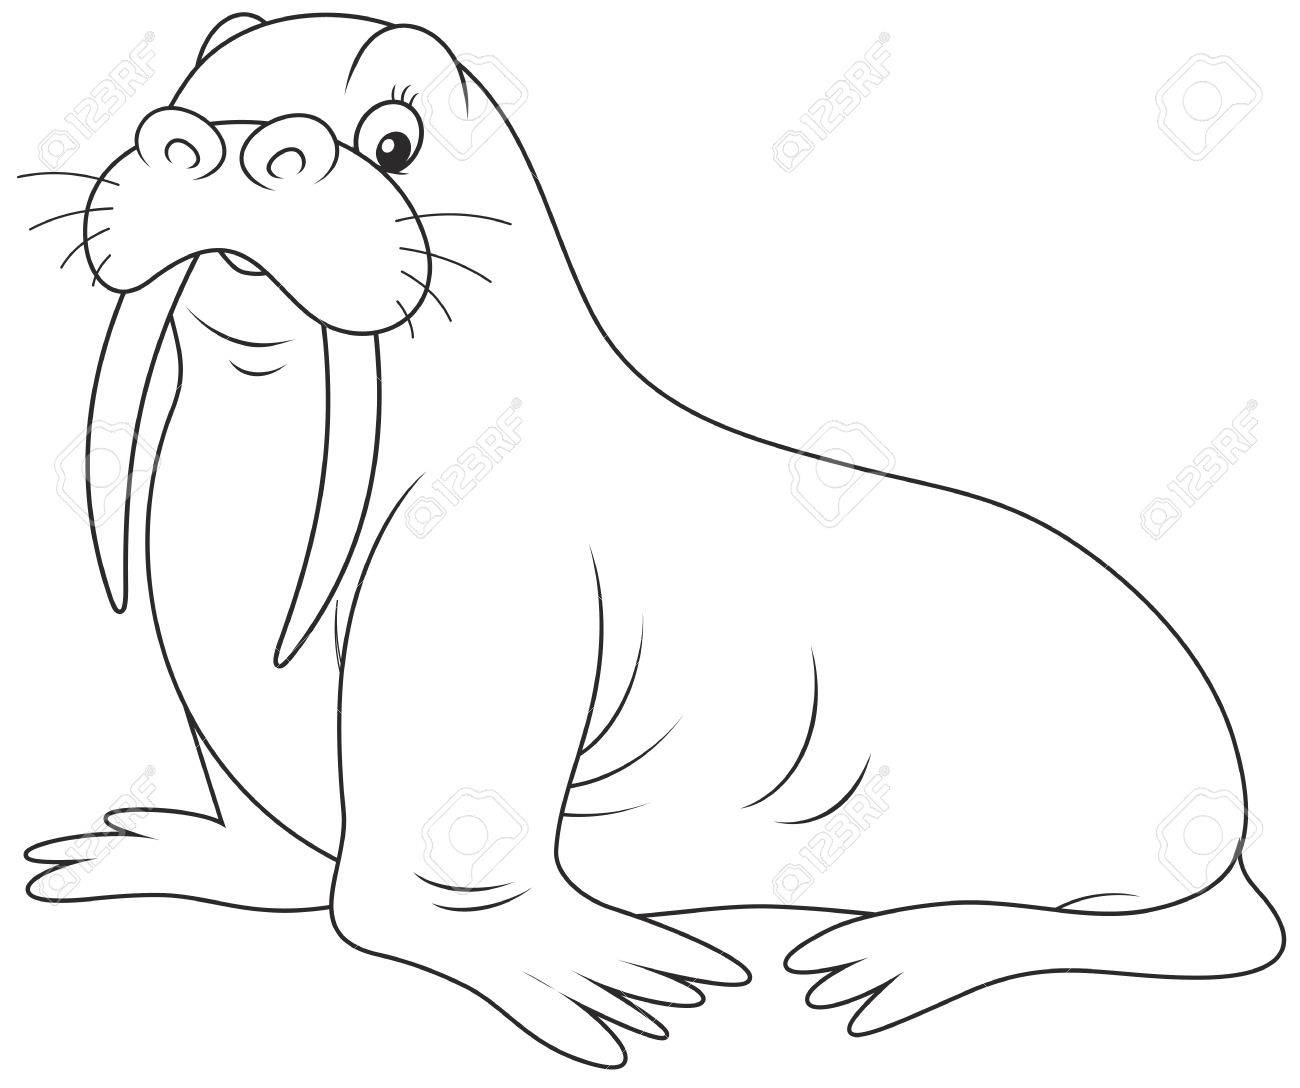 Walrus clipart black and white 2 » Clipart Station.